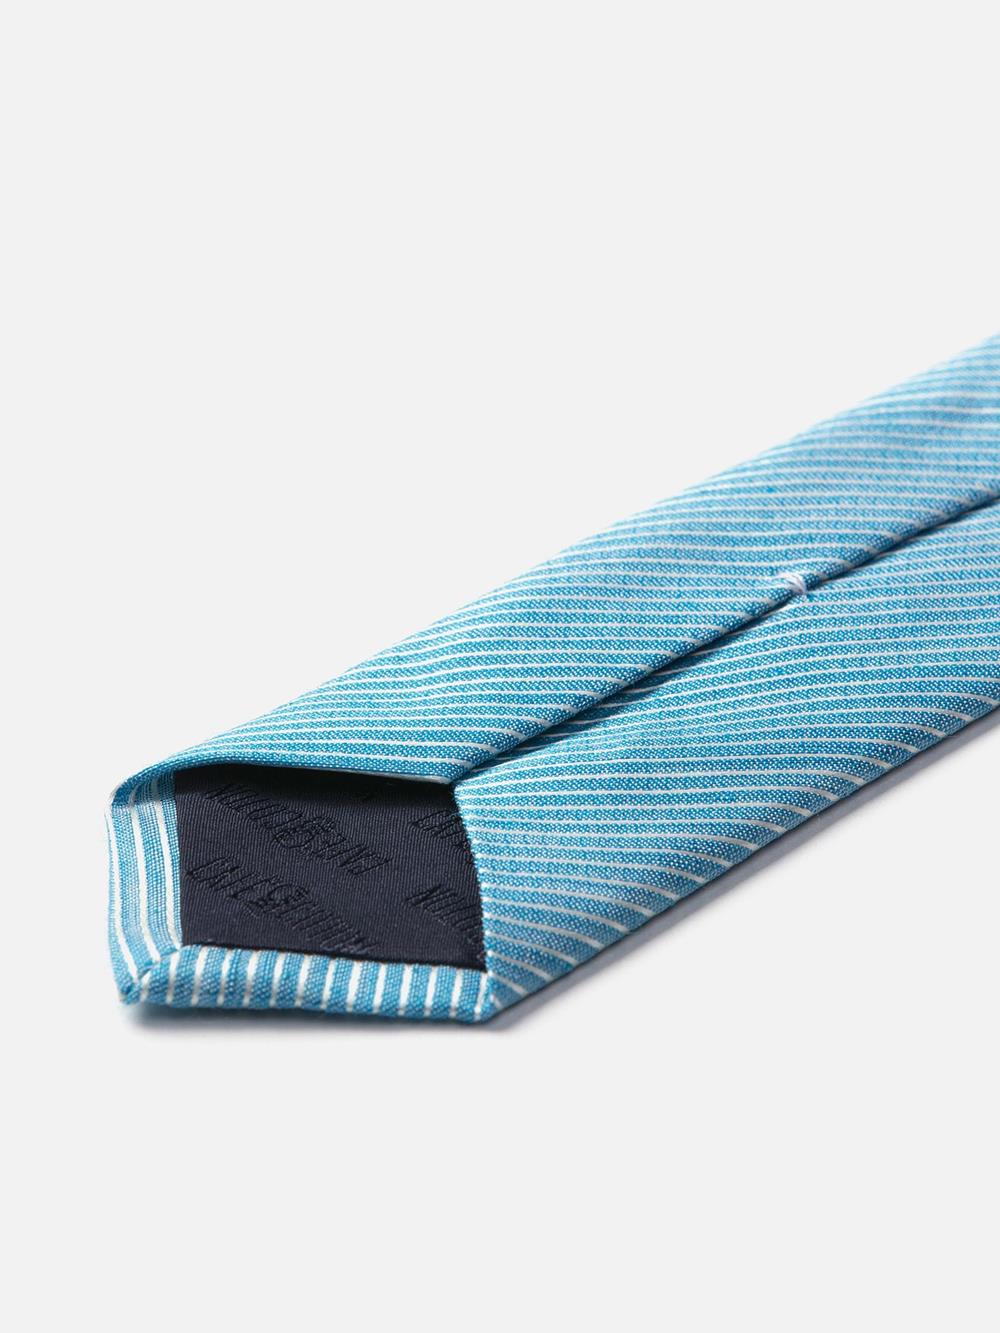 SLIM tie in linen and turquoise silk with micro scratches